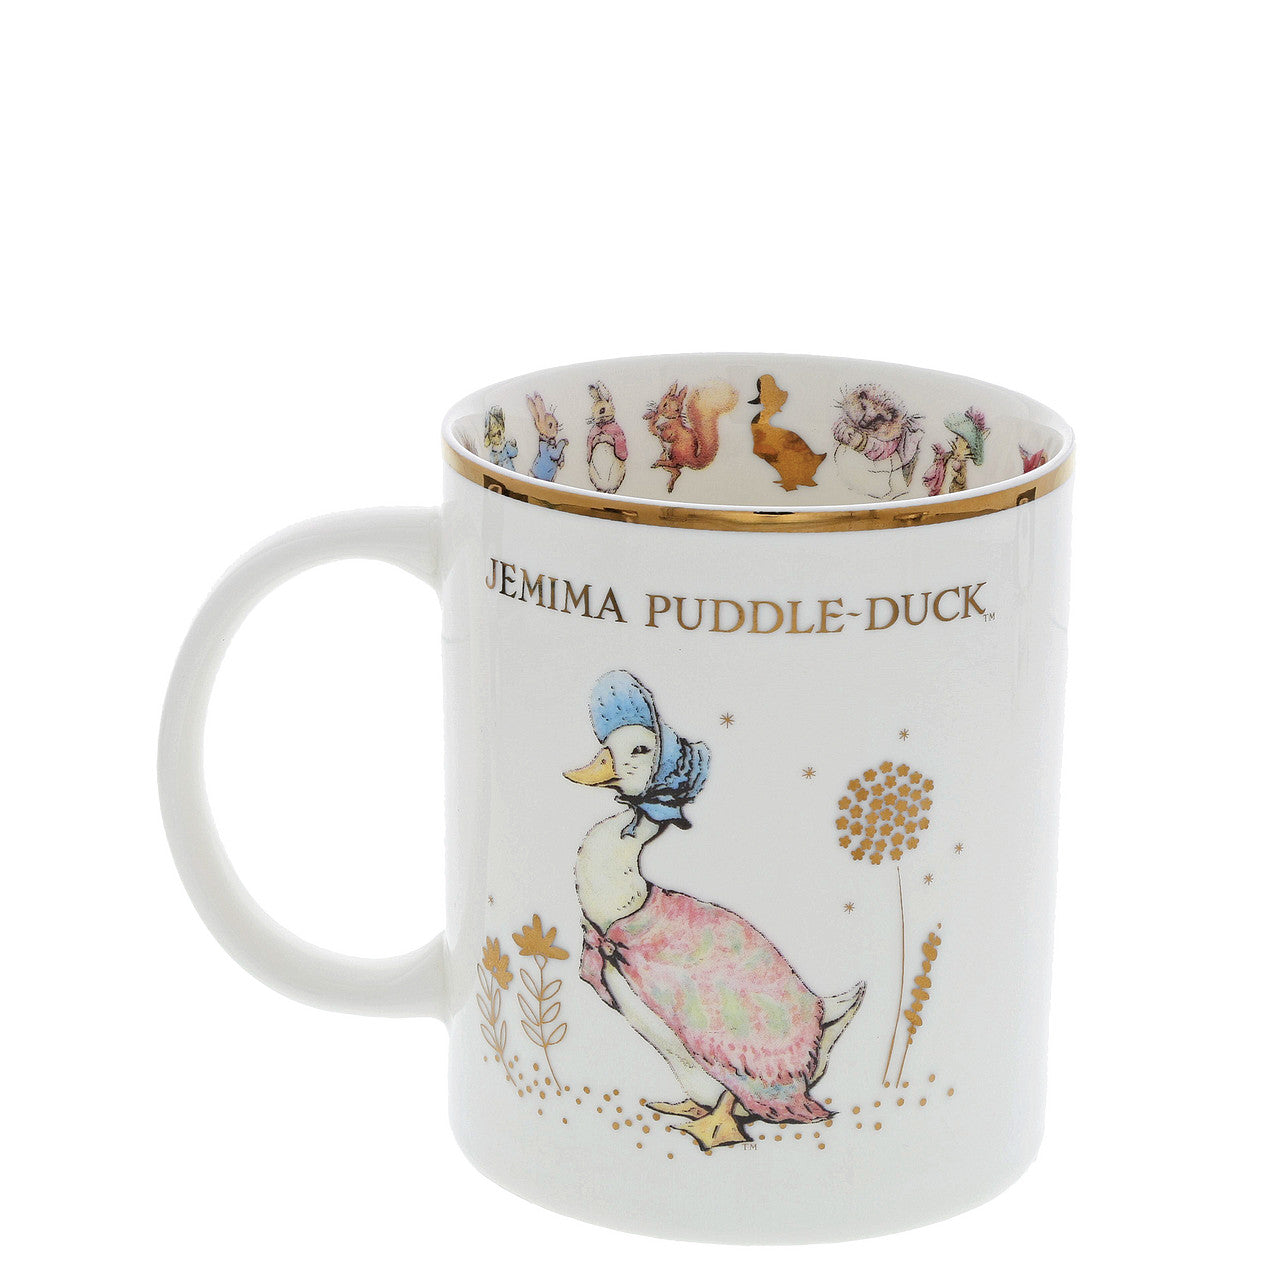 Jemima Puddle-duck - 2020 Special Edition Mug